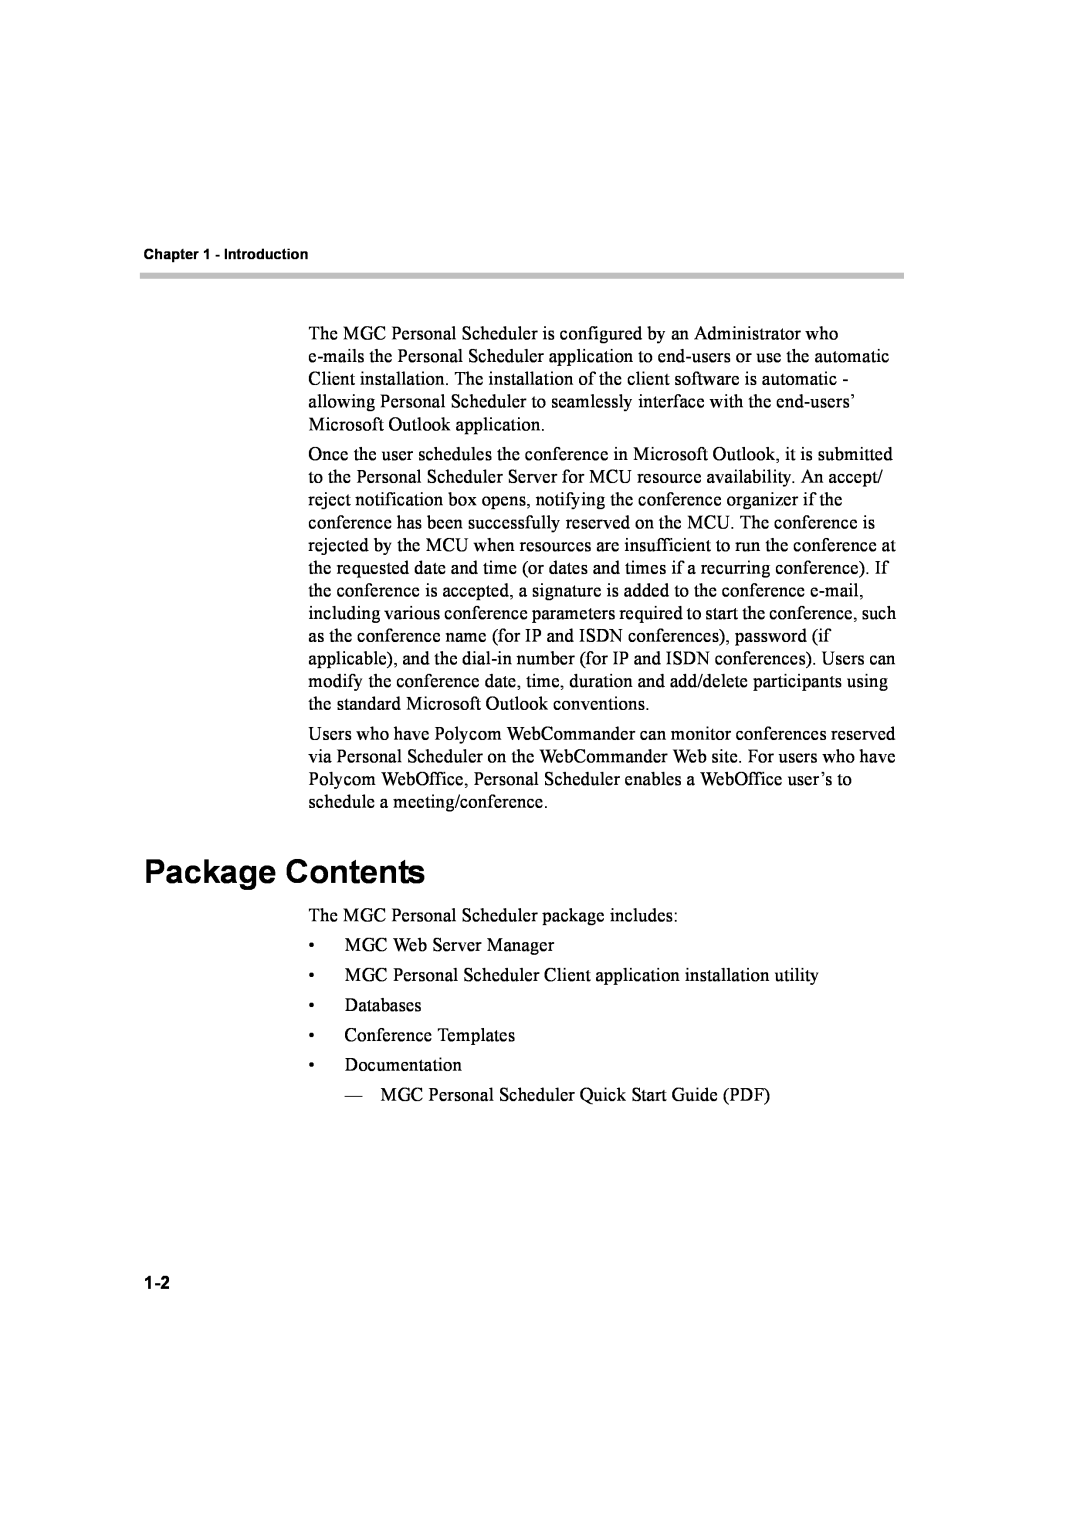 Polycom 8 quick start Package Contents 